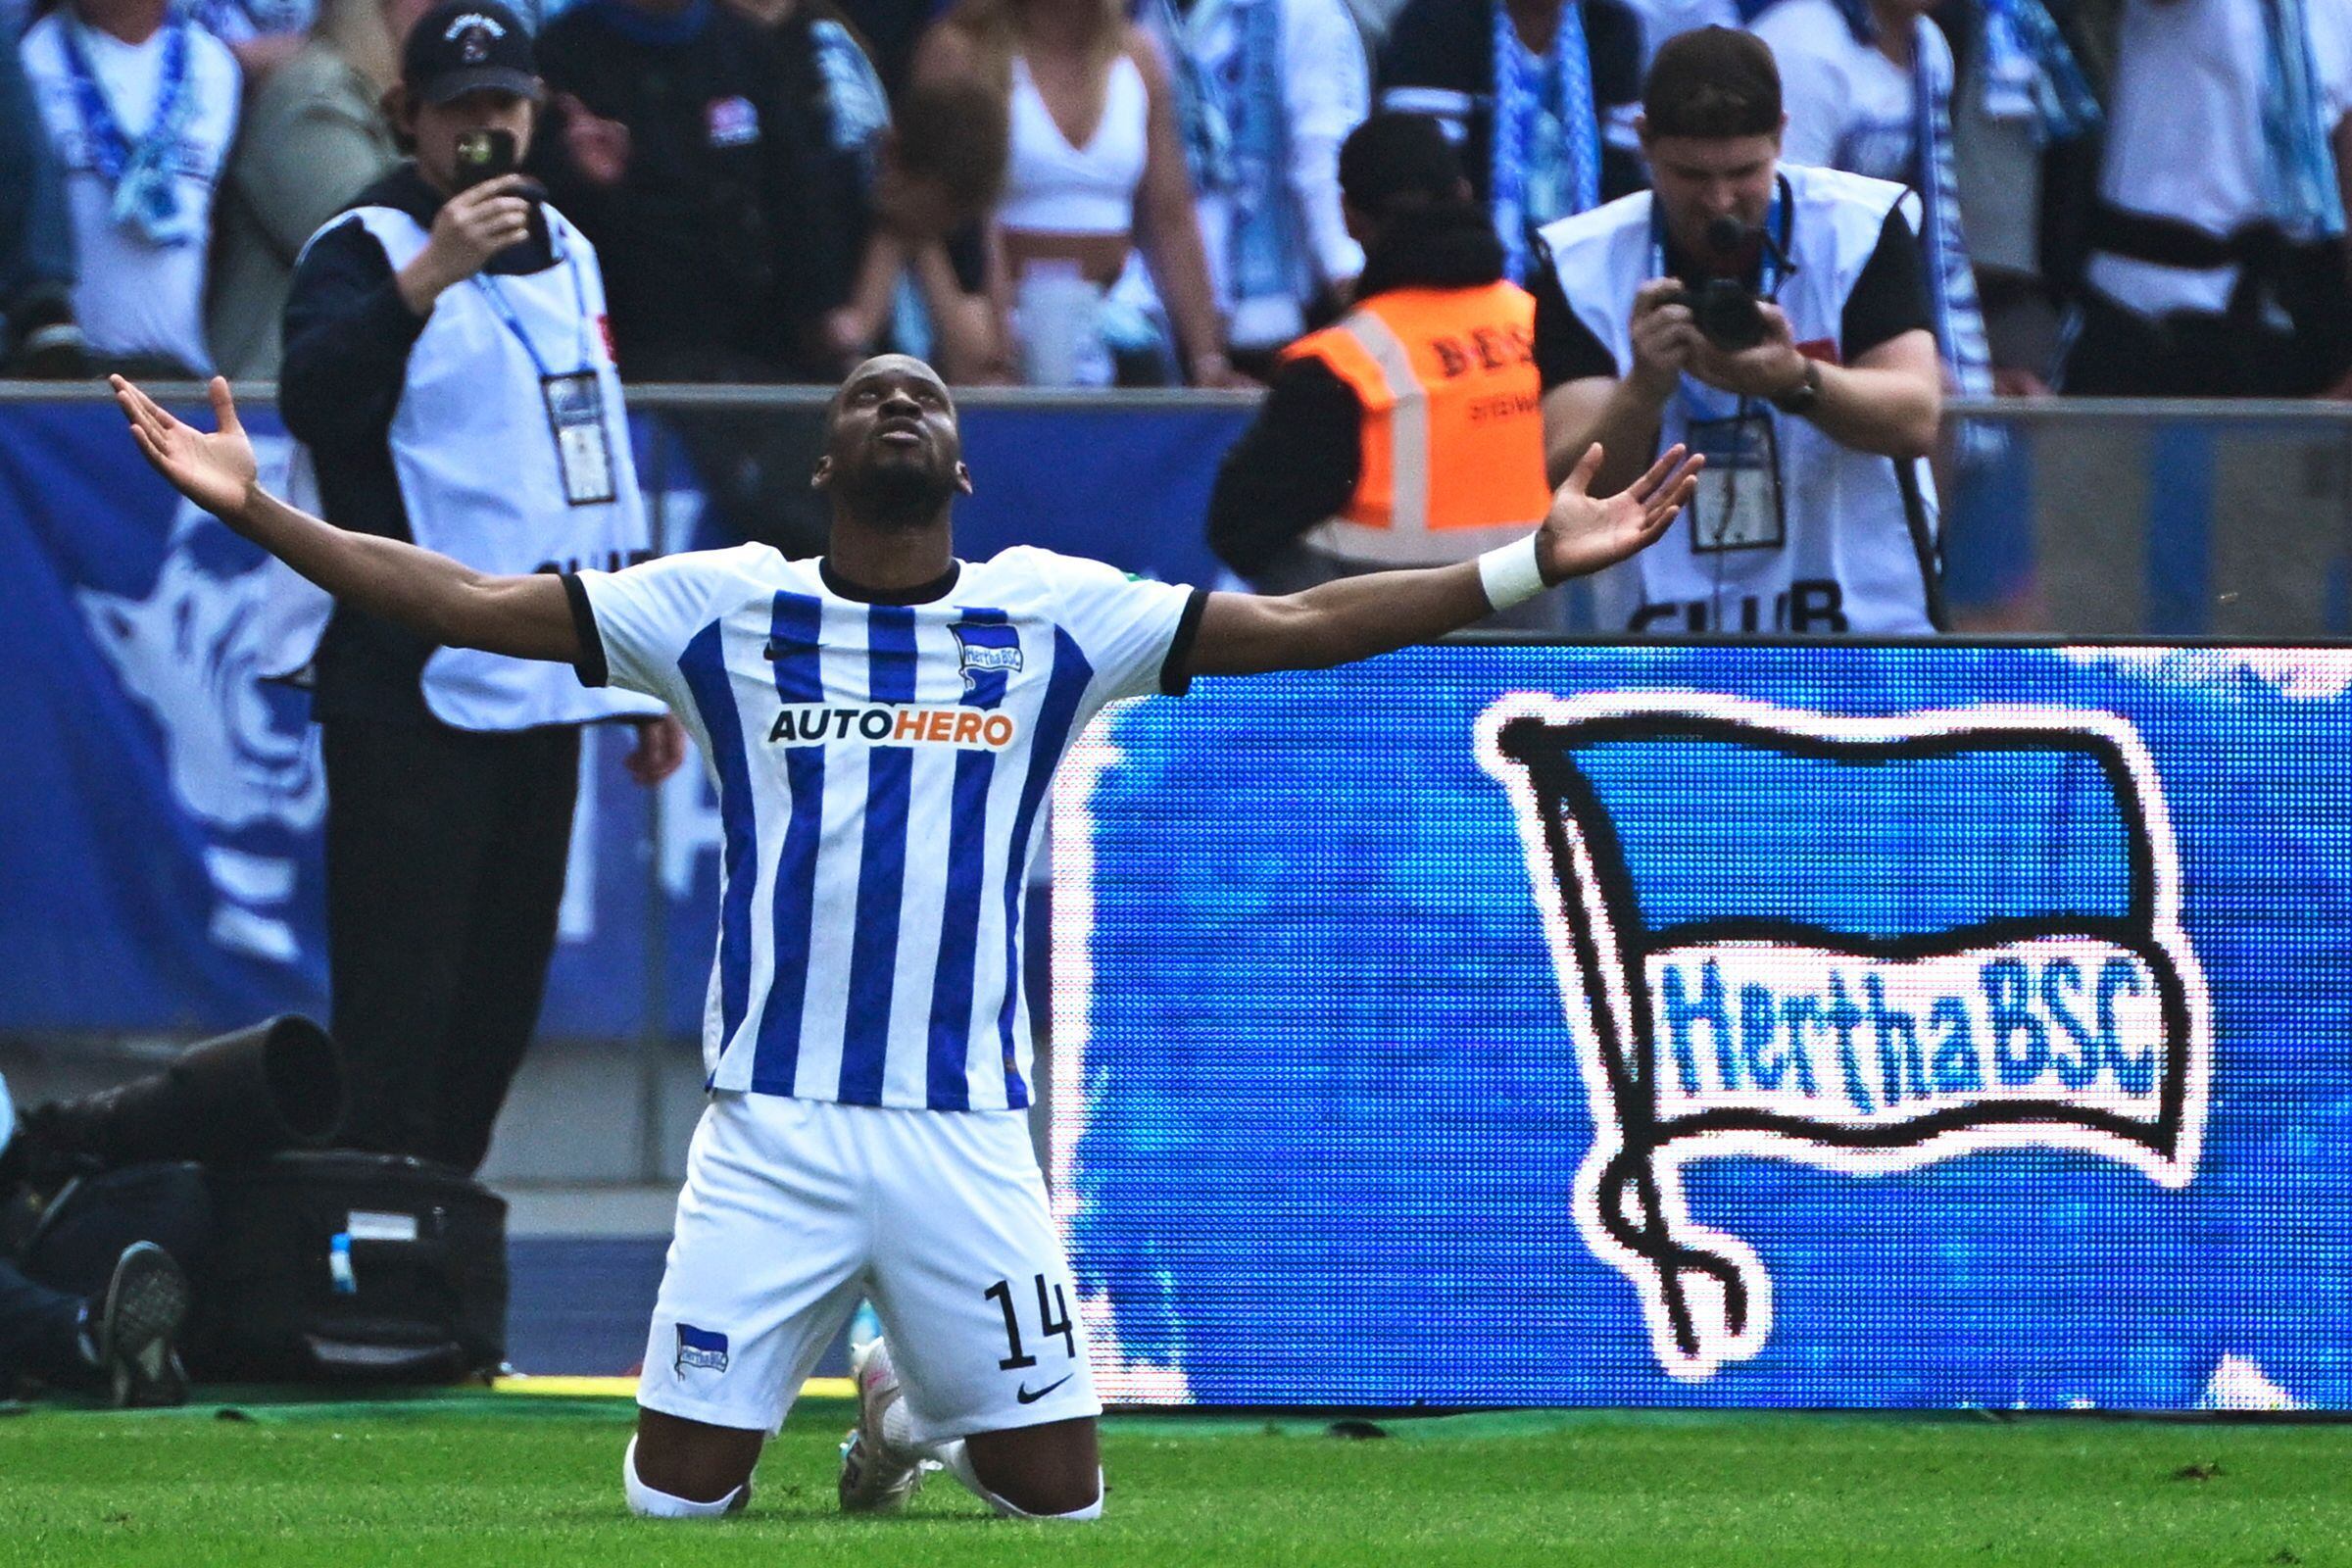 Hertha Berlin�s Belgian forward Dodi Lukebakio celebrates scoring a later unvalidated goal during the German first division Bundesliga football match between Hertha Berlin and VfL Bochum in Berlin, Germany, on May 20, 2023. (Photo by John MACDOUGALL / AFP) / DFL REGULATIONS PROHIBIT ANY USE OF PHOTOGRAPHS AS IMAGE SEQUENCES AND/OR QUASI-VIDEO